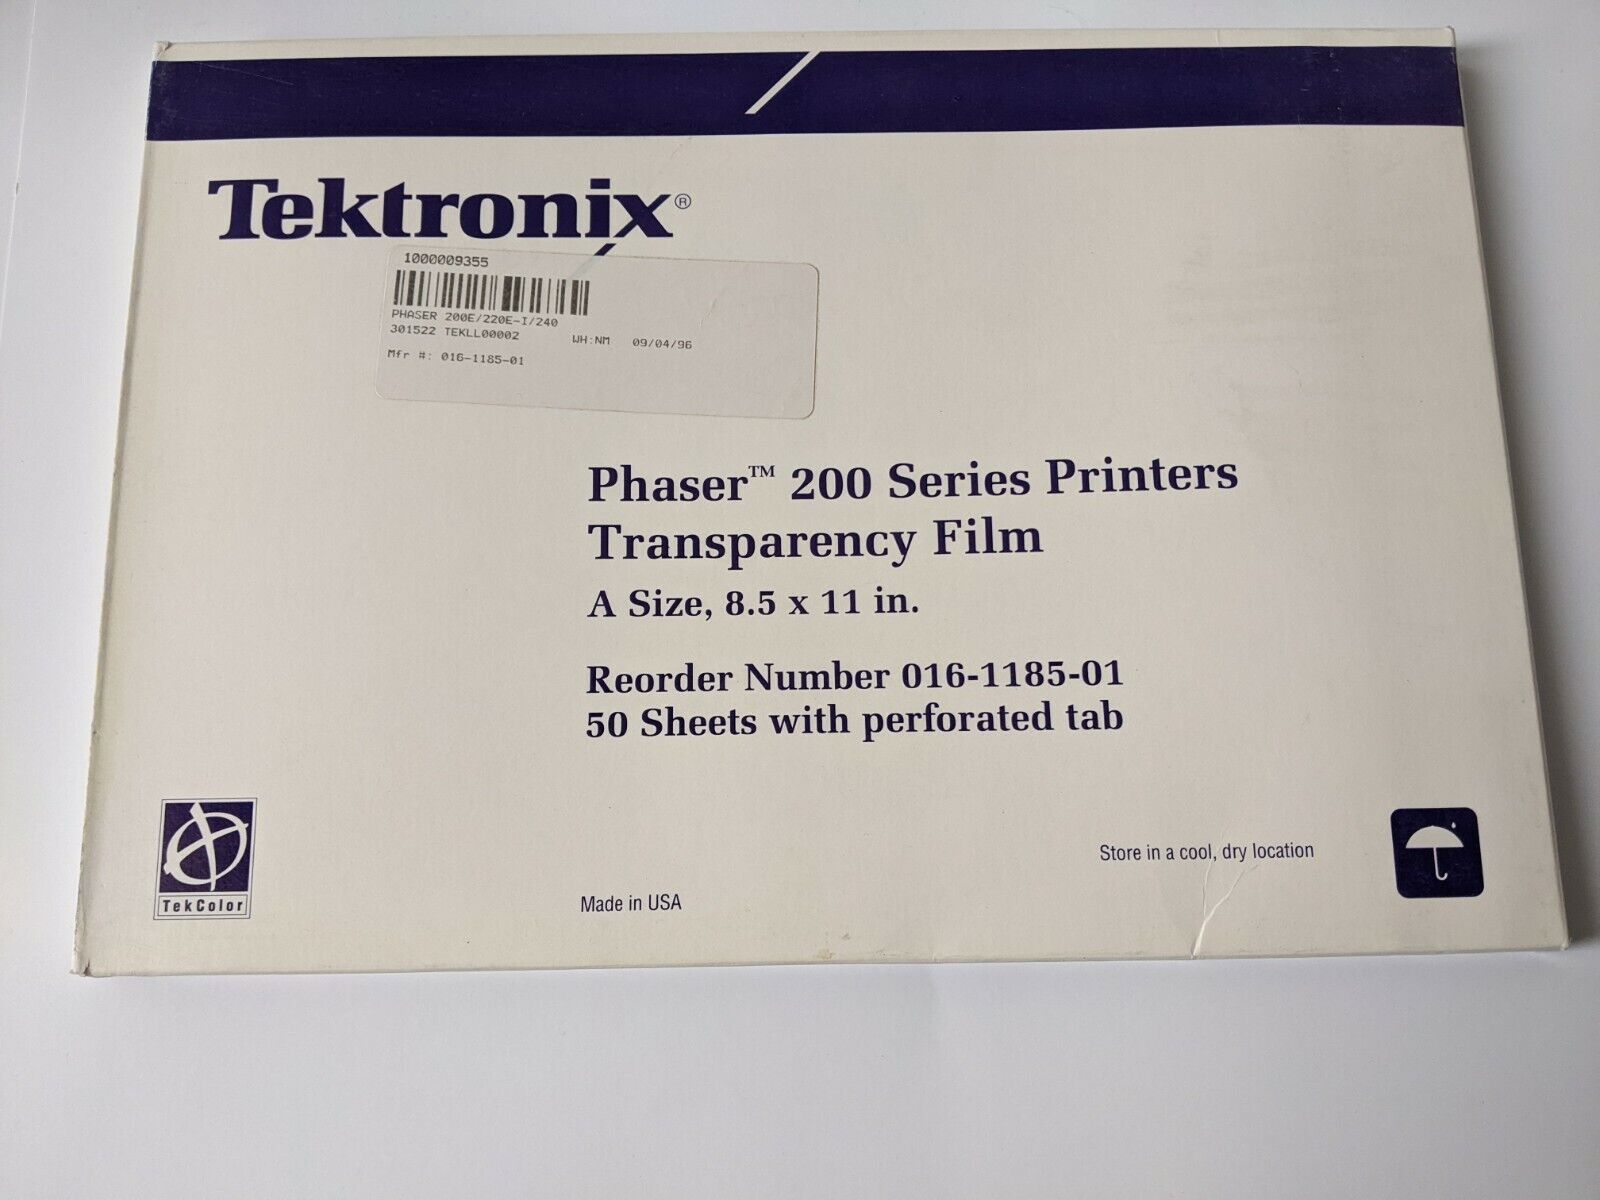 Tektronix Phaser 200 Transparency Film A Size 8.5 X 11 in 50 sheets 016-1185-01